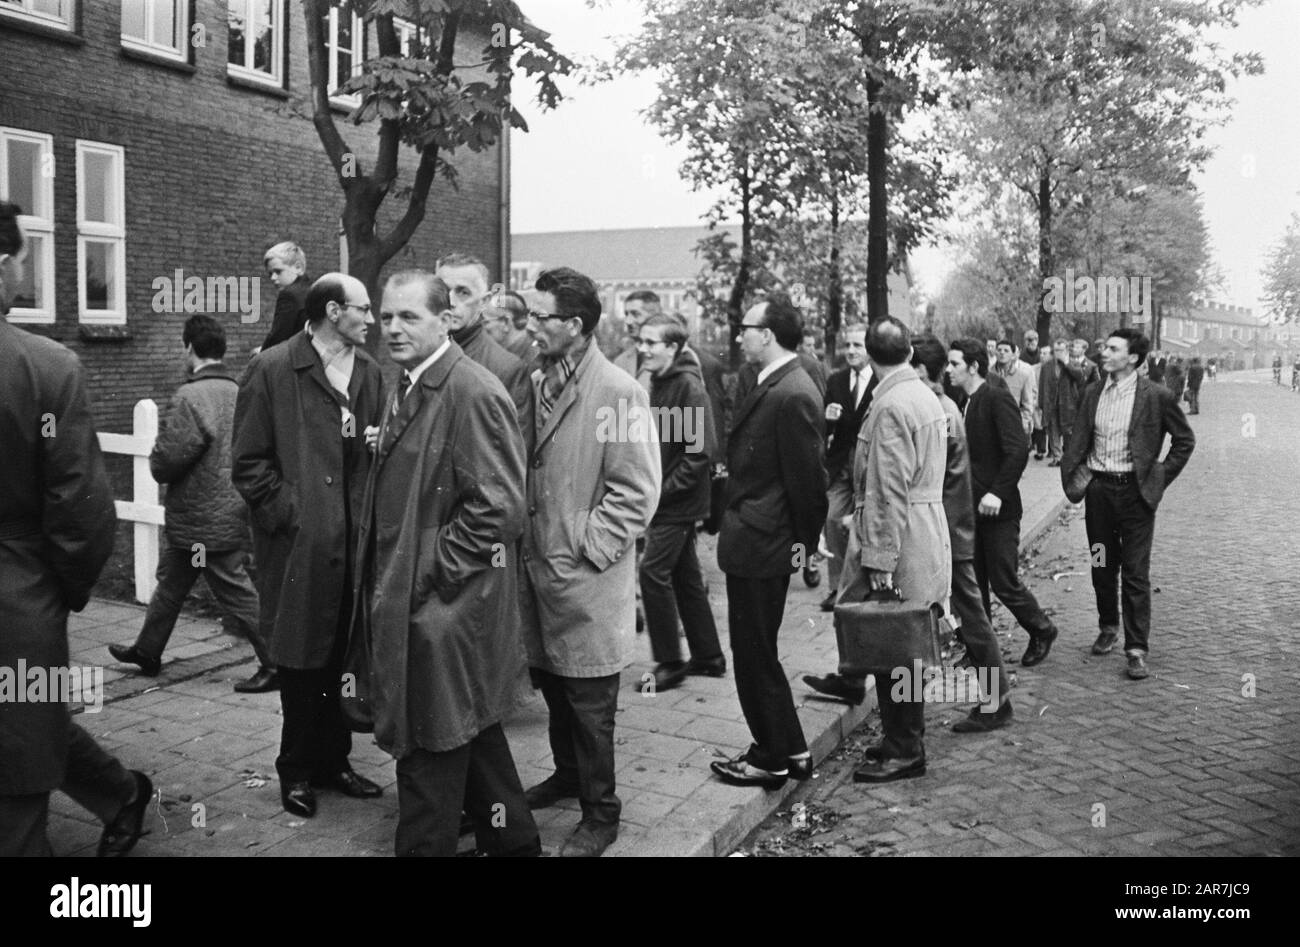 Staff Bata Shoe factories at Best on strike. Workers for association  building Date: 11 October 1967 Location: Best Keywords: SHOE factories,  Strikes Personal name: BATA Stock Photo - Alamy